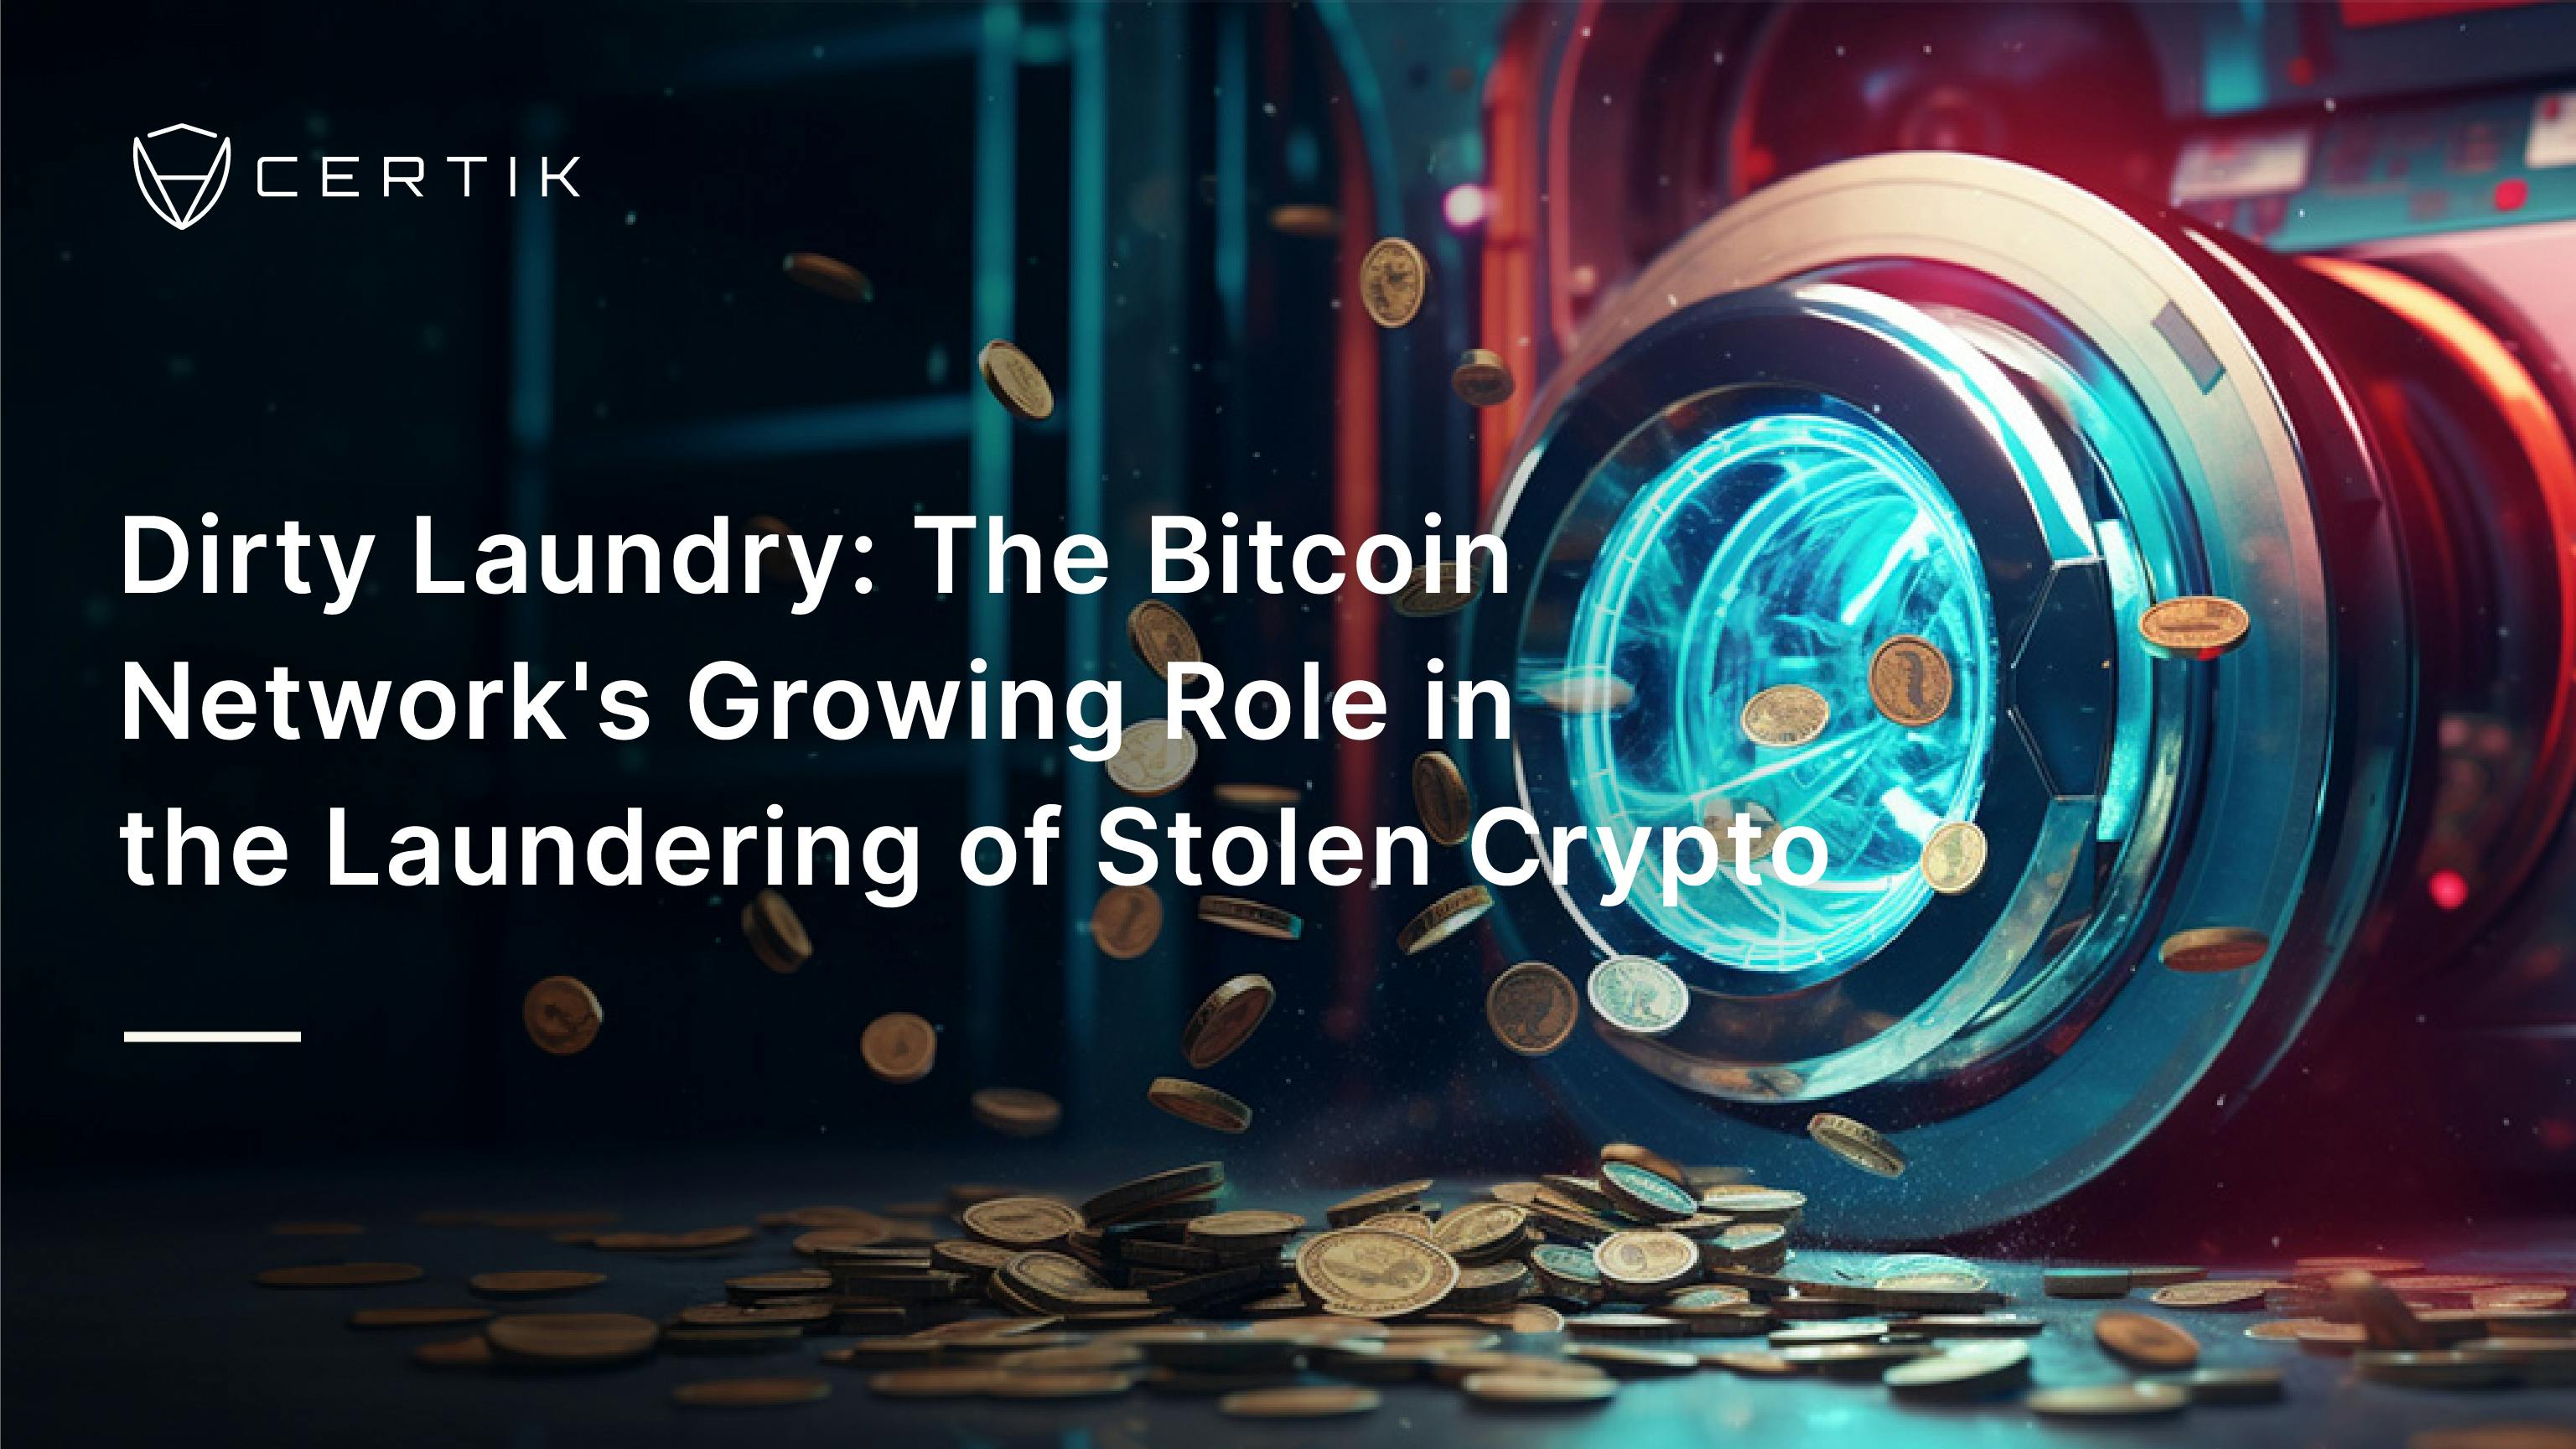 Dirty Laundry: The Bitcoin Network's Growing Role in the Laundering of Stolen Crypto